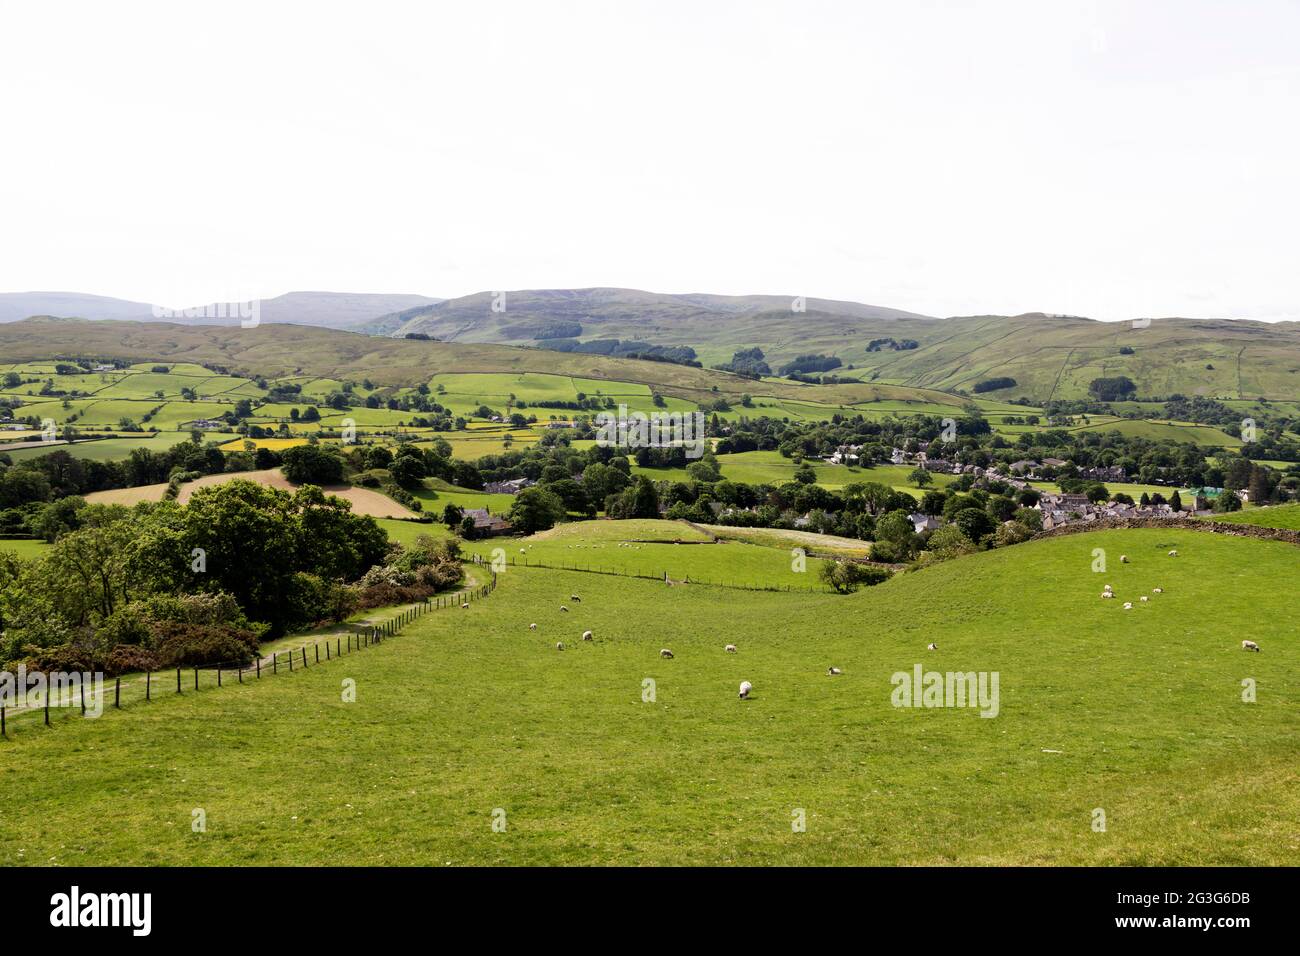 Sheep graze in field above the town of Sedbergh in Cumbria, England. Sedbergh is in the Yorkshire Dales National Park. Stock Photo